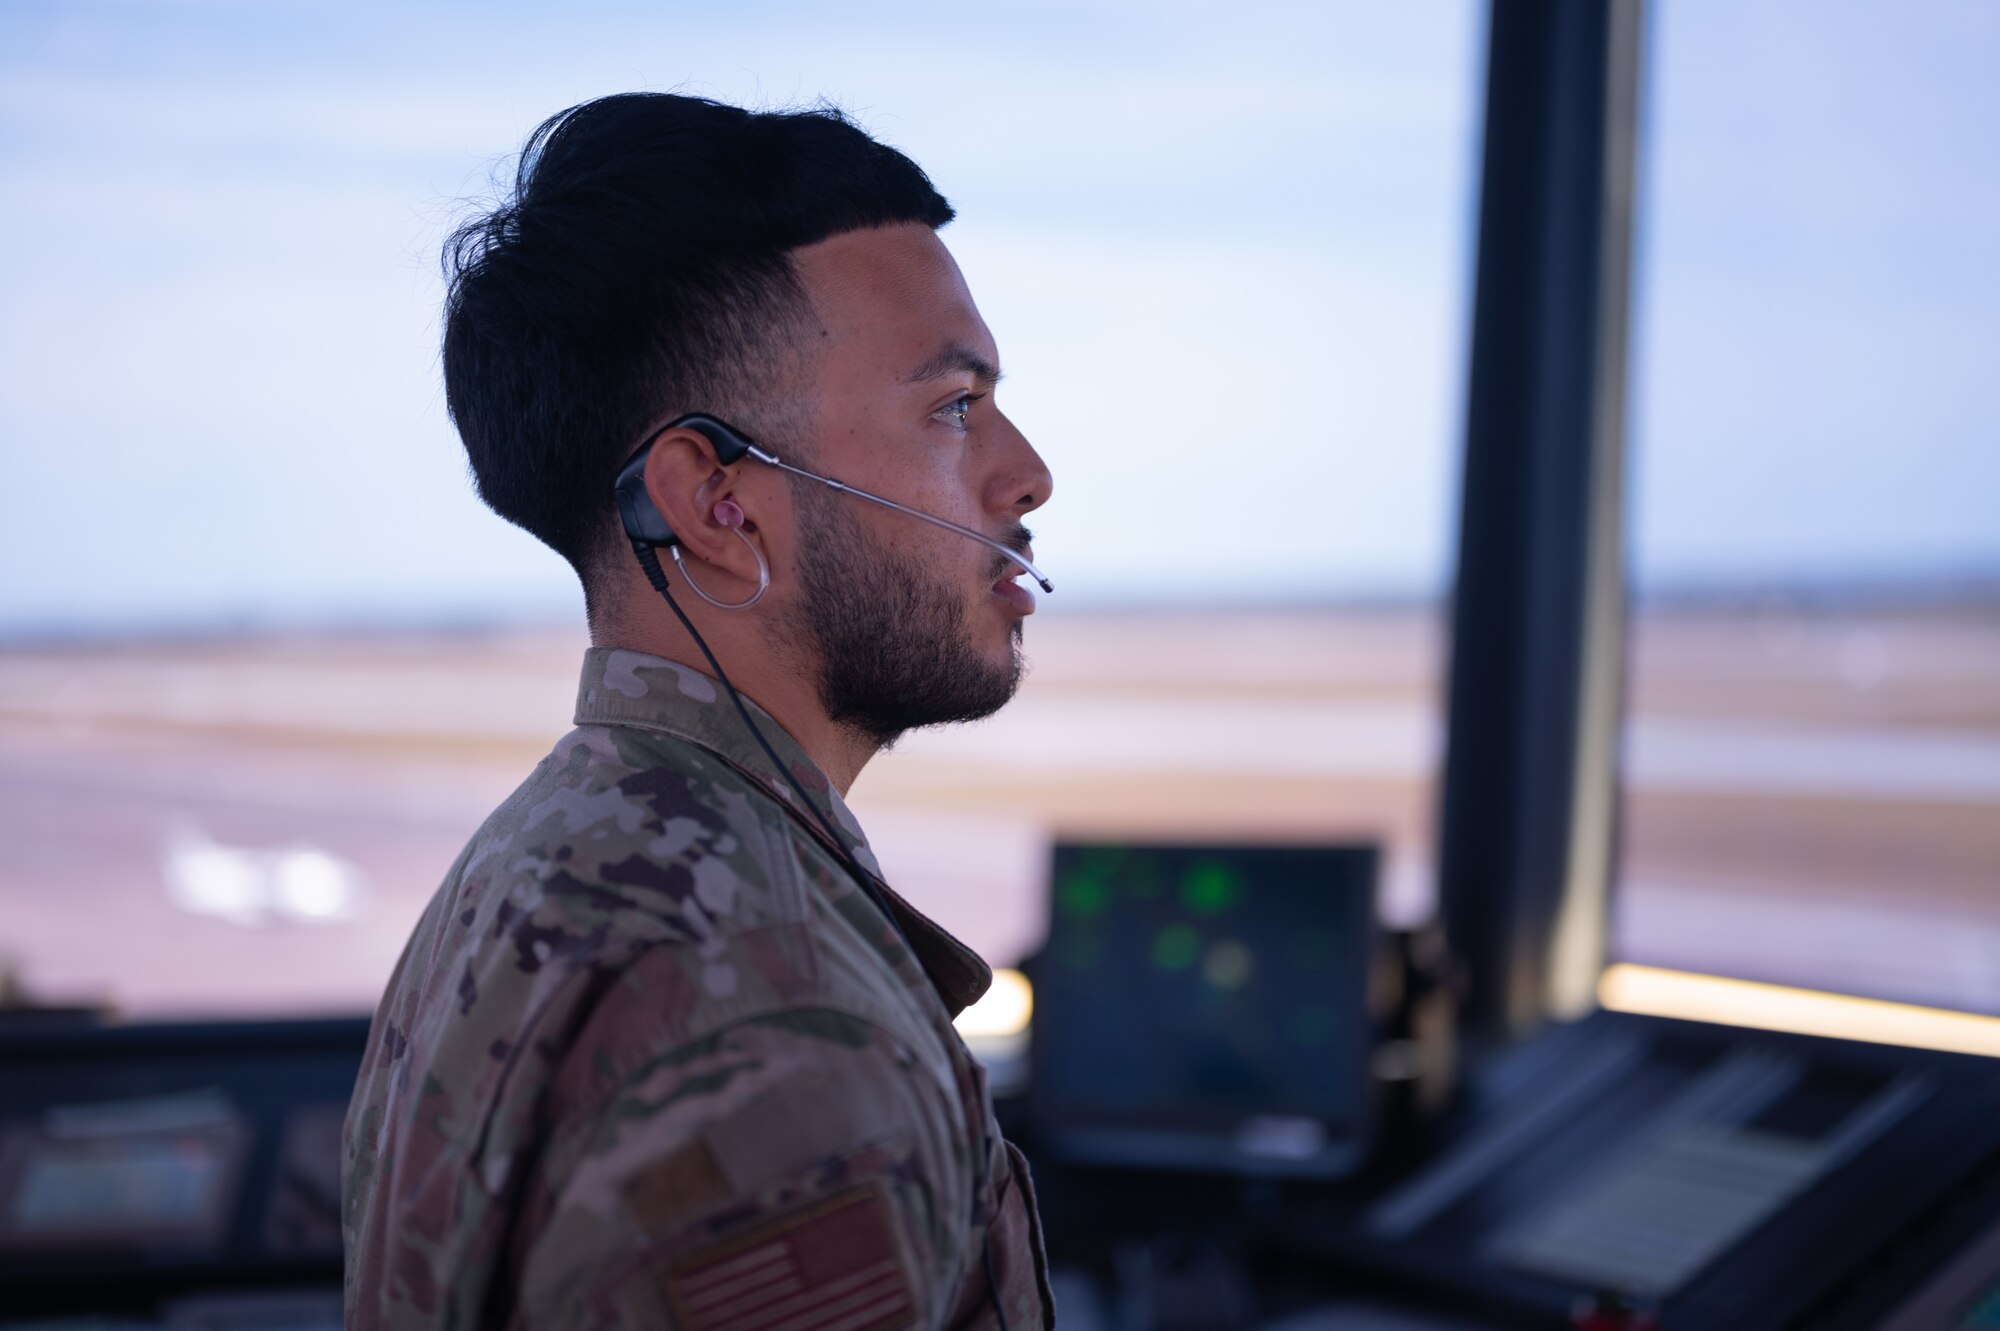 An Airman looks out on to the flight line from an air control tower.